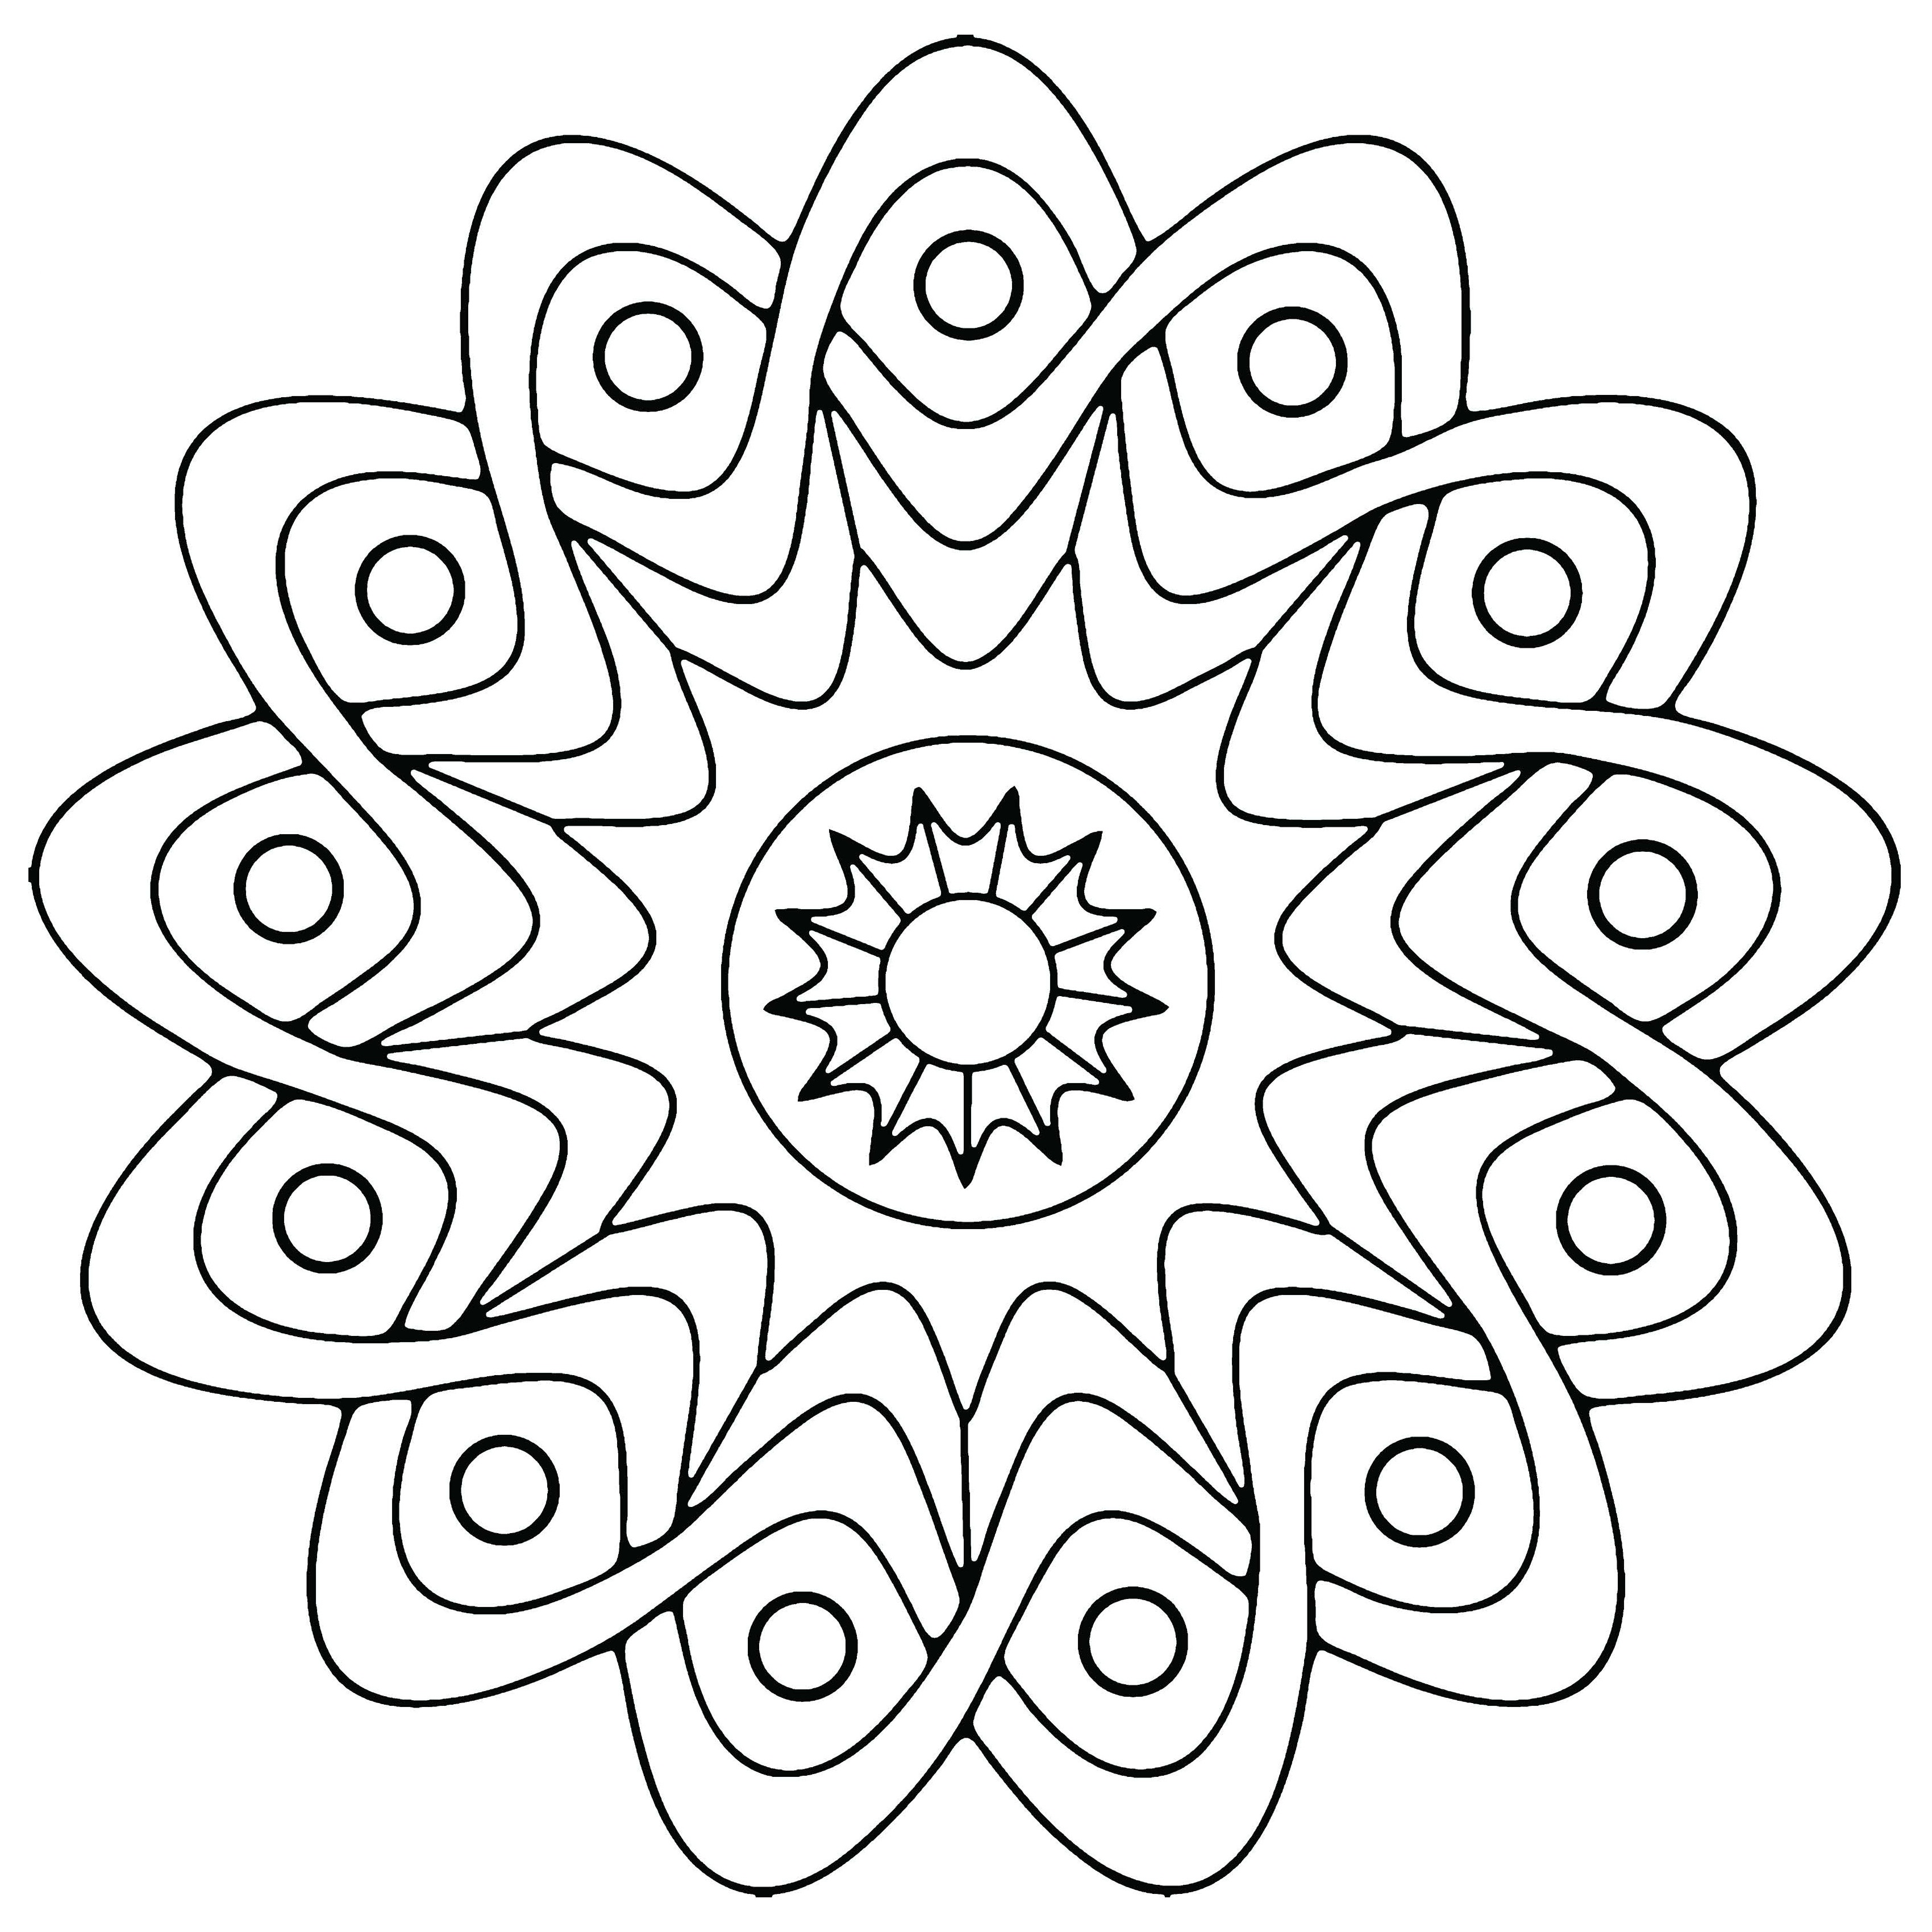 Download Free Printable Geometric Coloring Pages For Kids